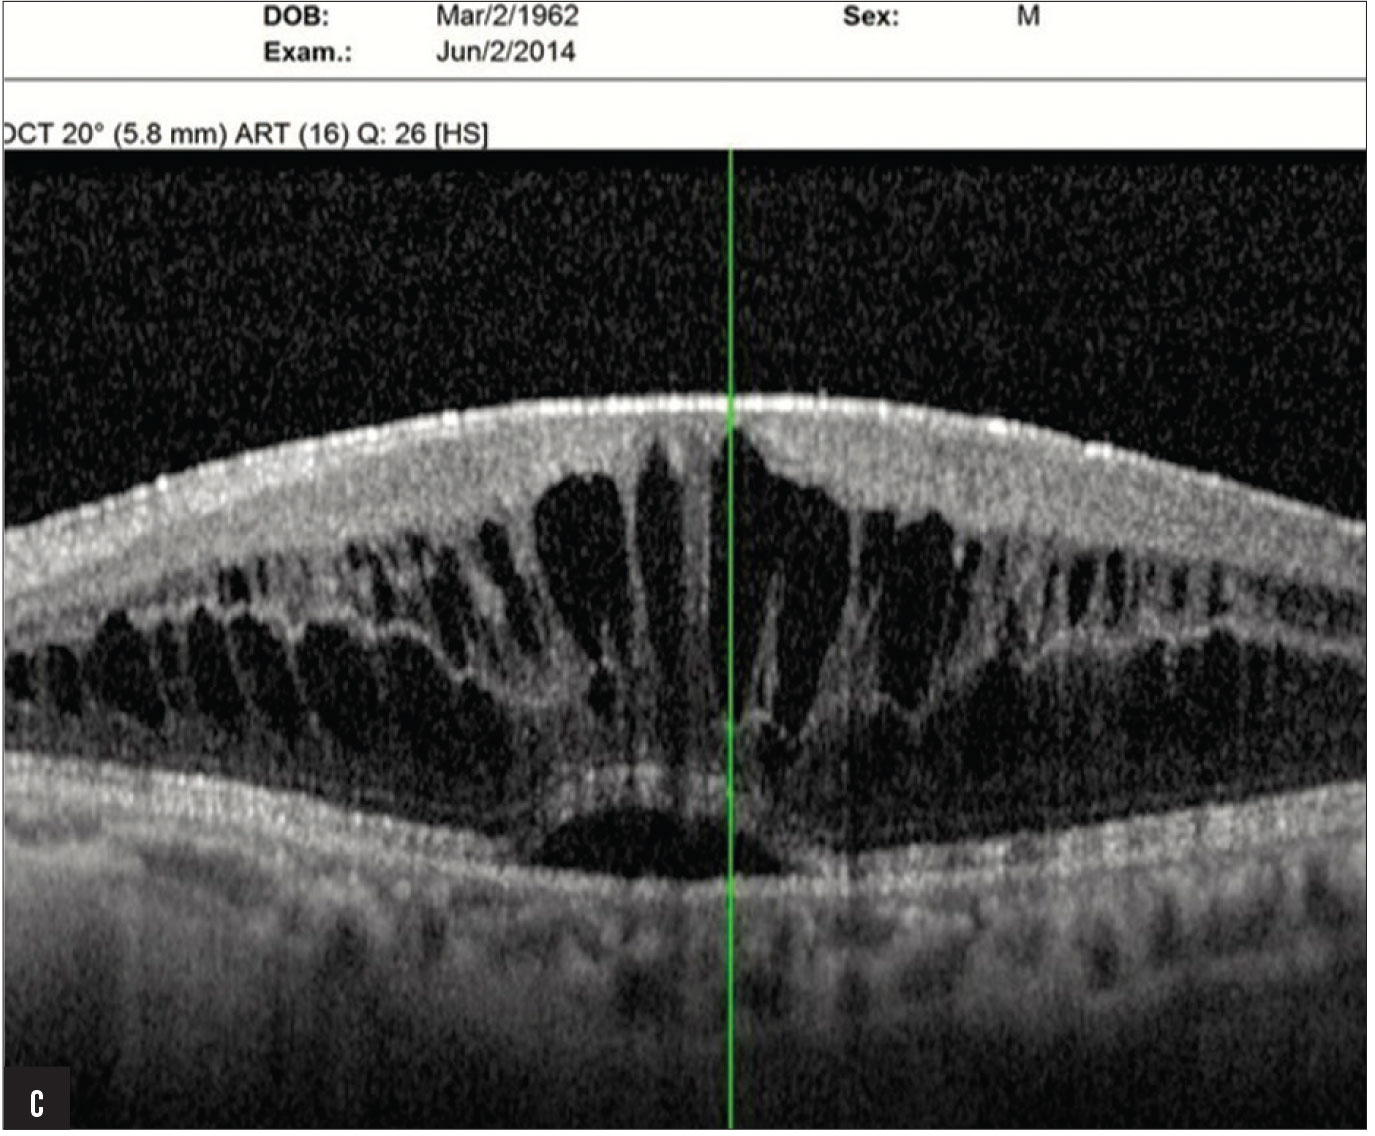 Figure 1C. The same patient (seen in Figures 1A and B) also had marked cystoid macular edema associated with the AC IOL in the left eye.